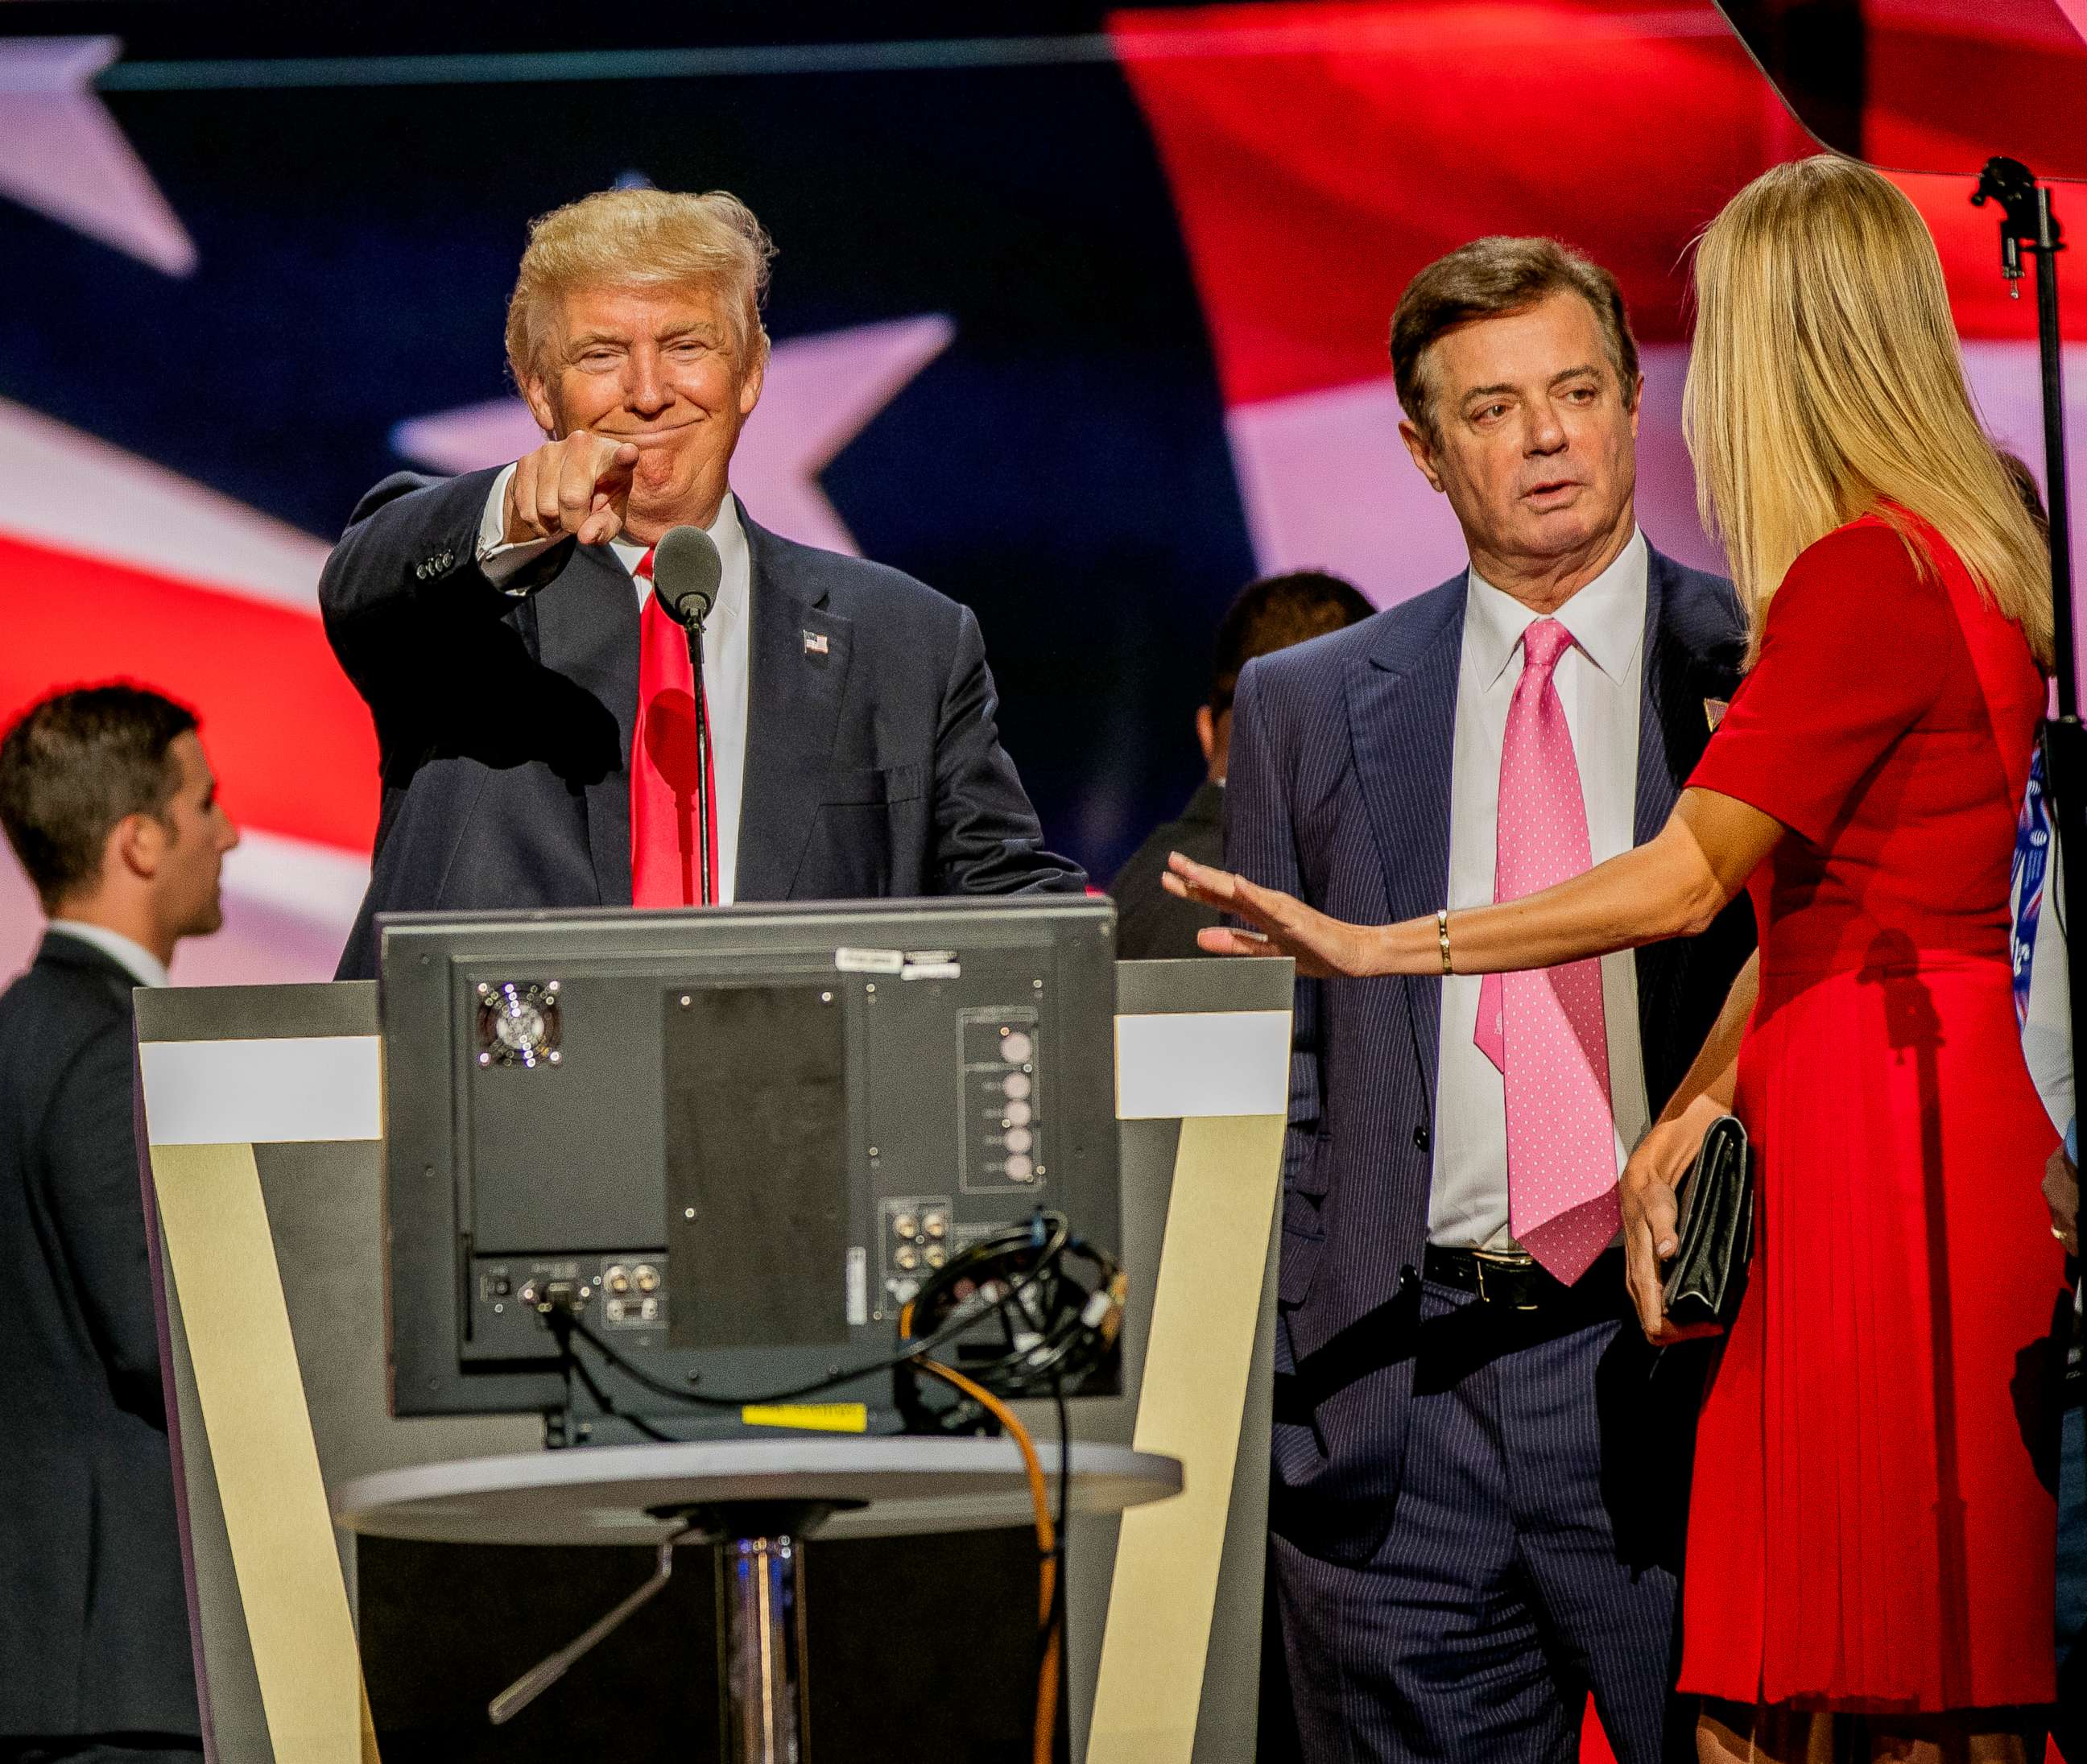 PHOTO: Donald Trump is seen on stage with Paul Manafort on the final day of the Republican National Convention at Quicken Loans Arena, Cleveland, Ohio, July 21, 2016.